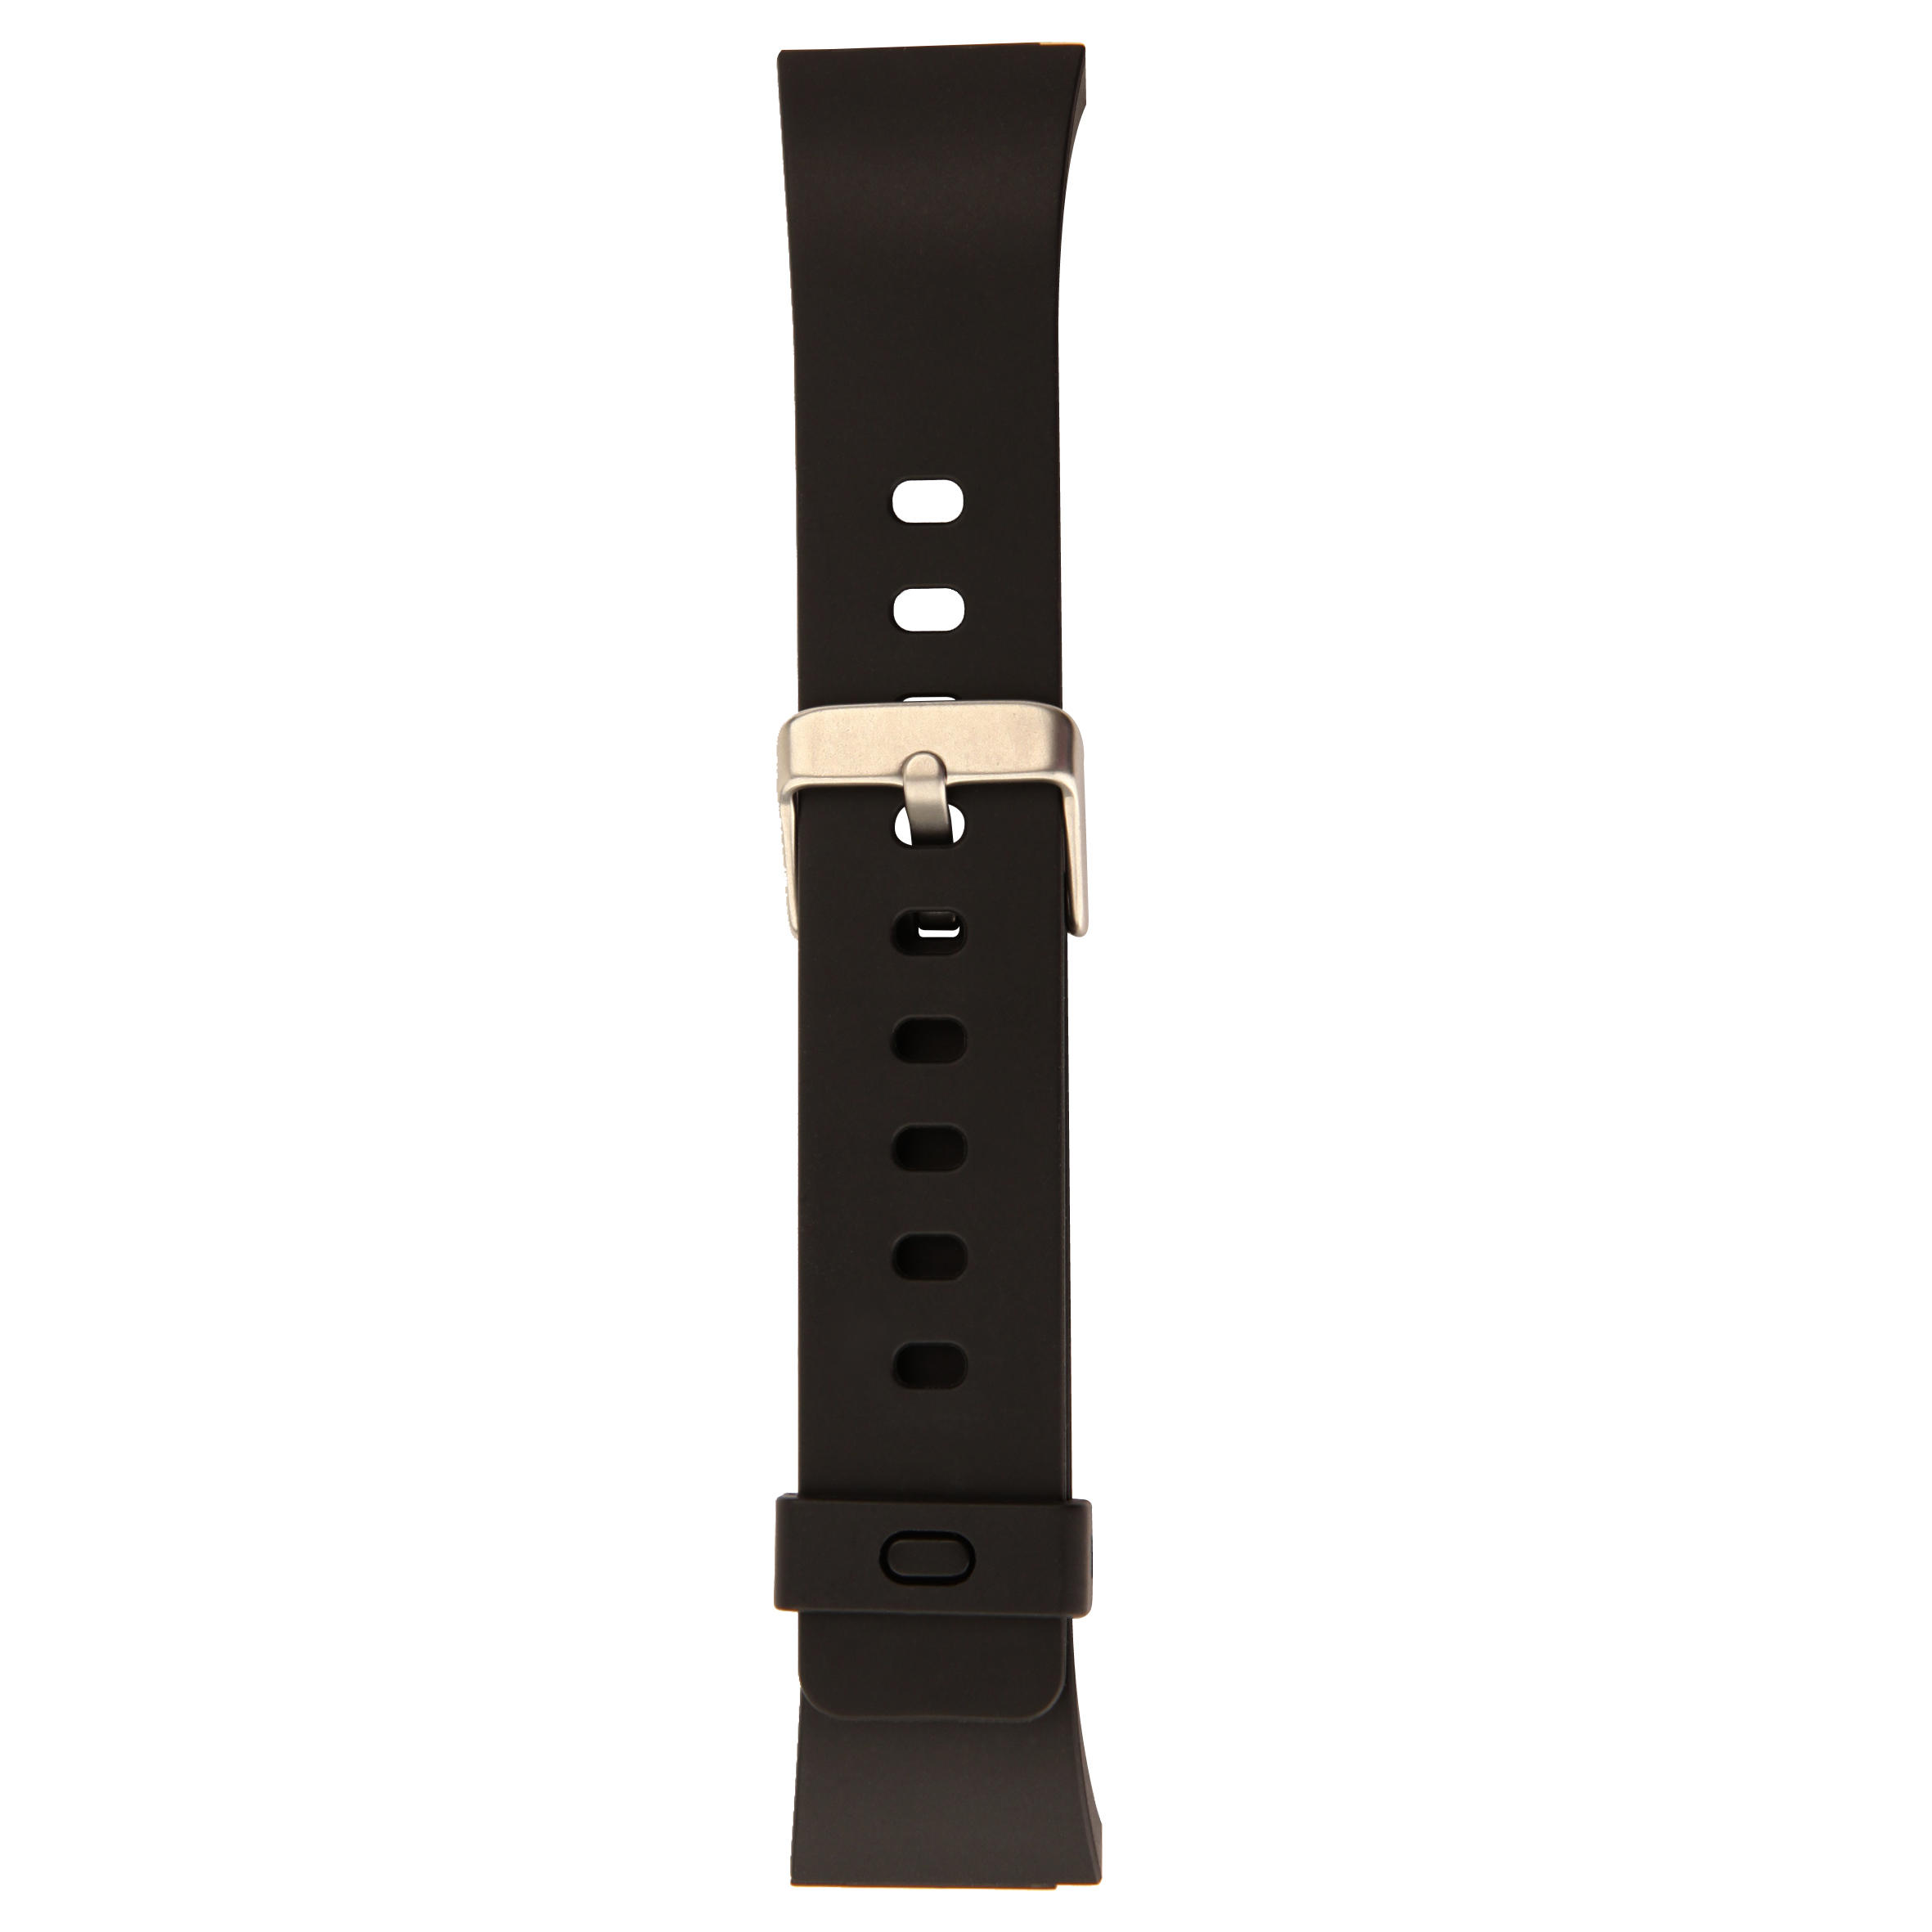 WATCH STRAP COMPATIBLE W500, W700 AND 